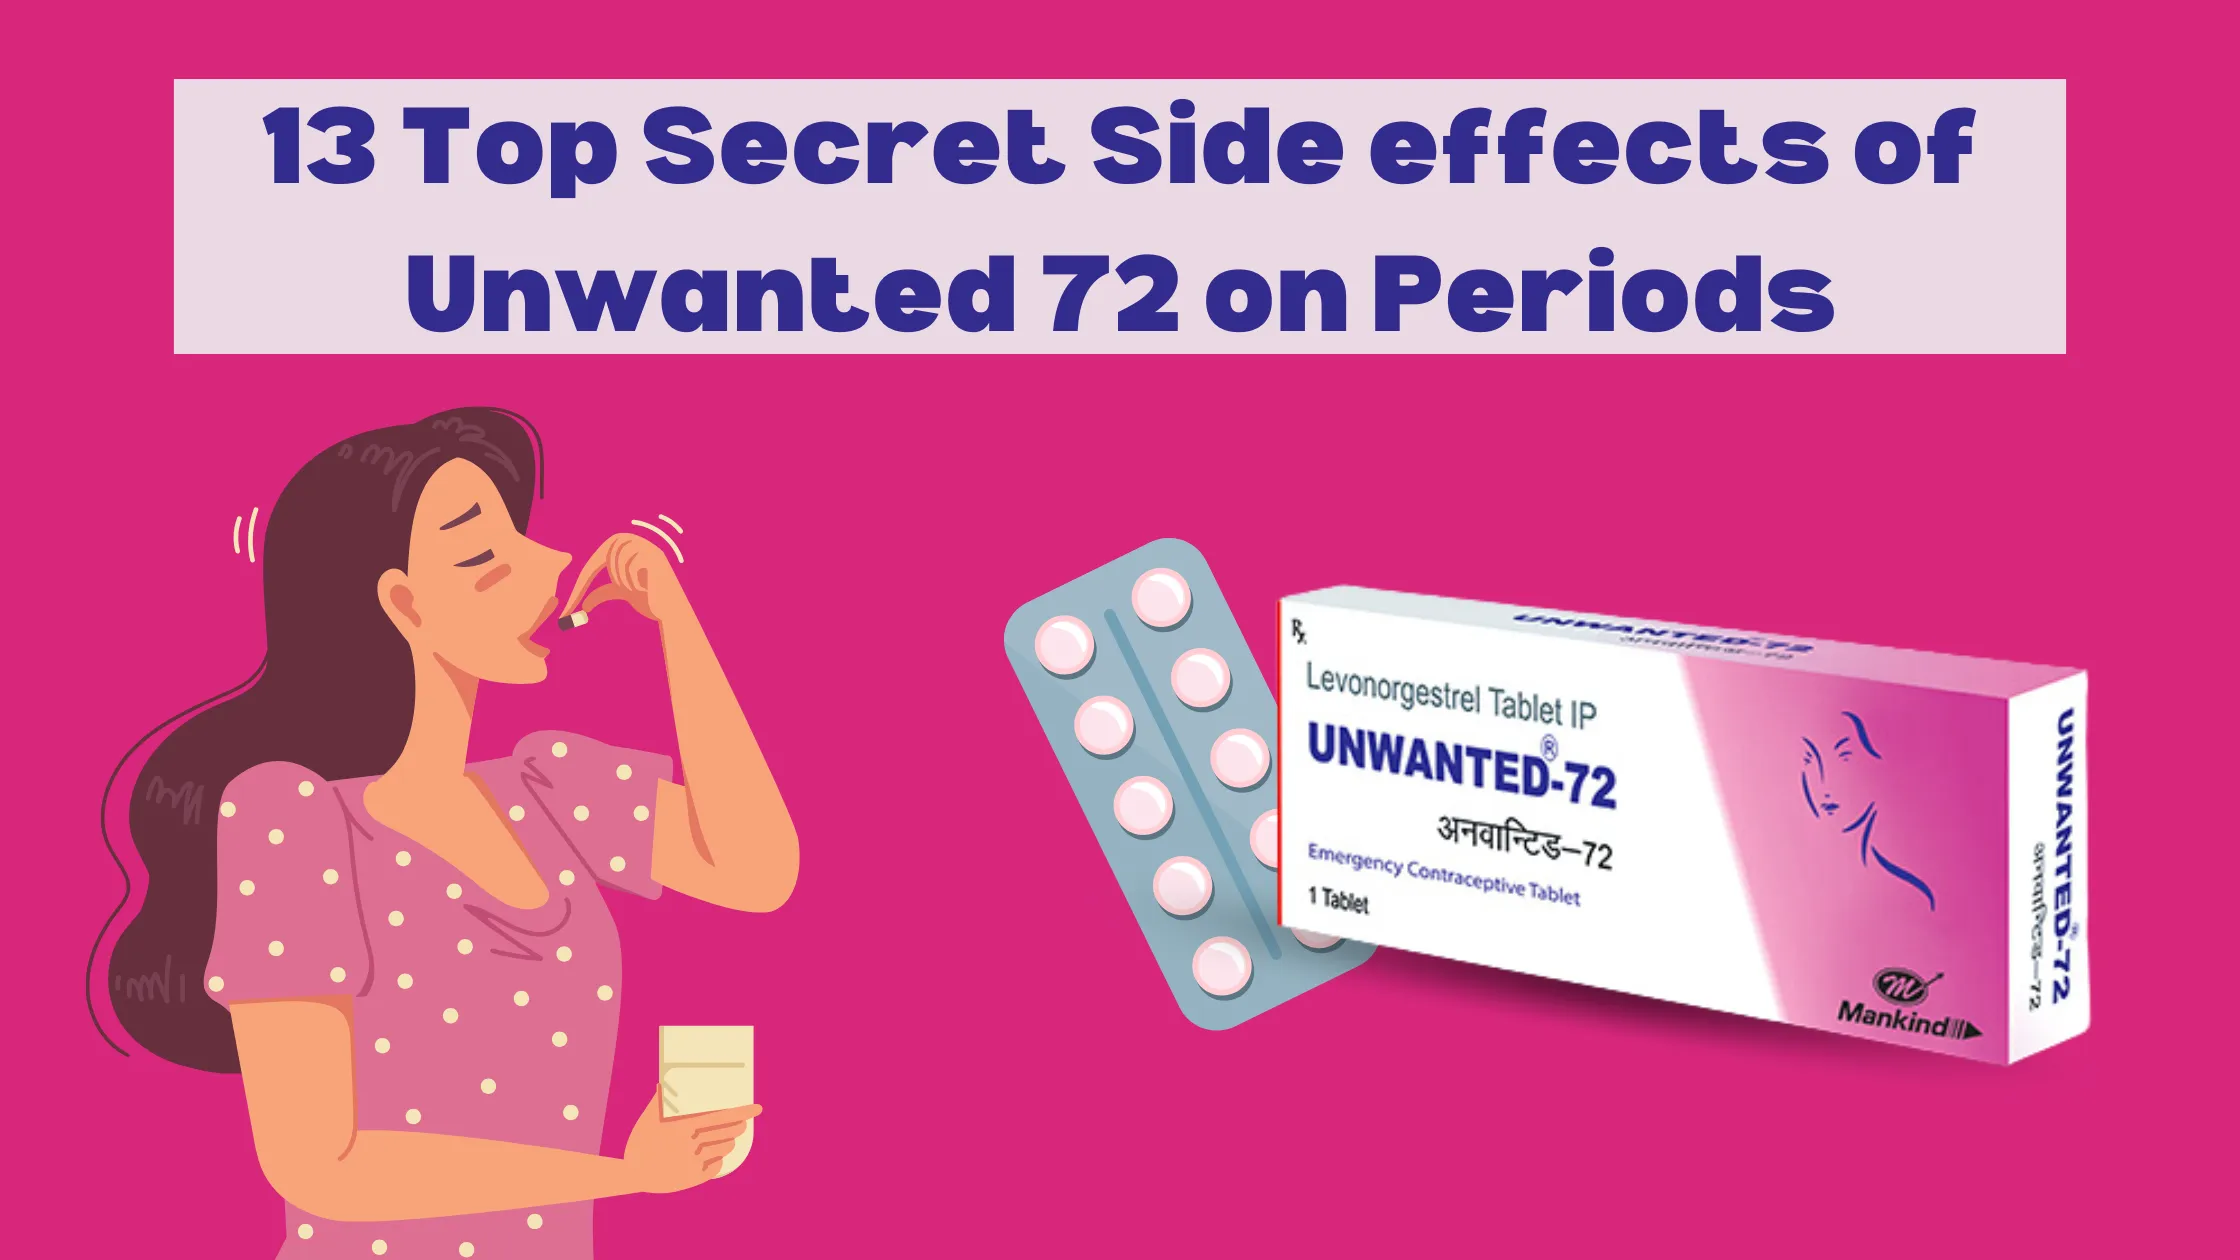 13 Top Secret Side effects of Unwanted 72 on Periods